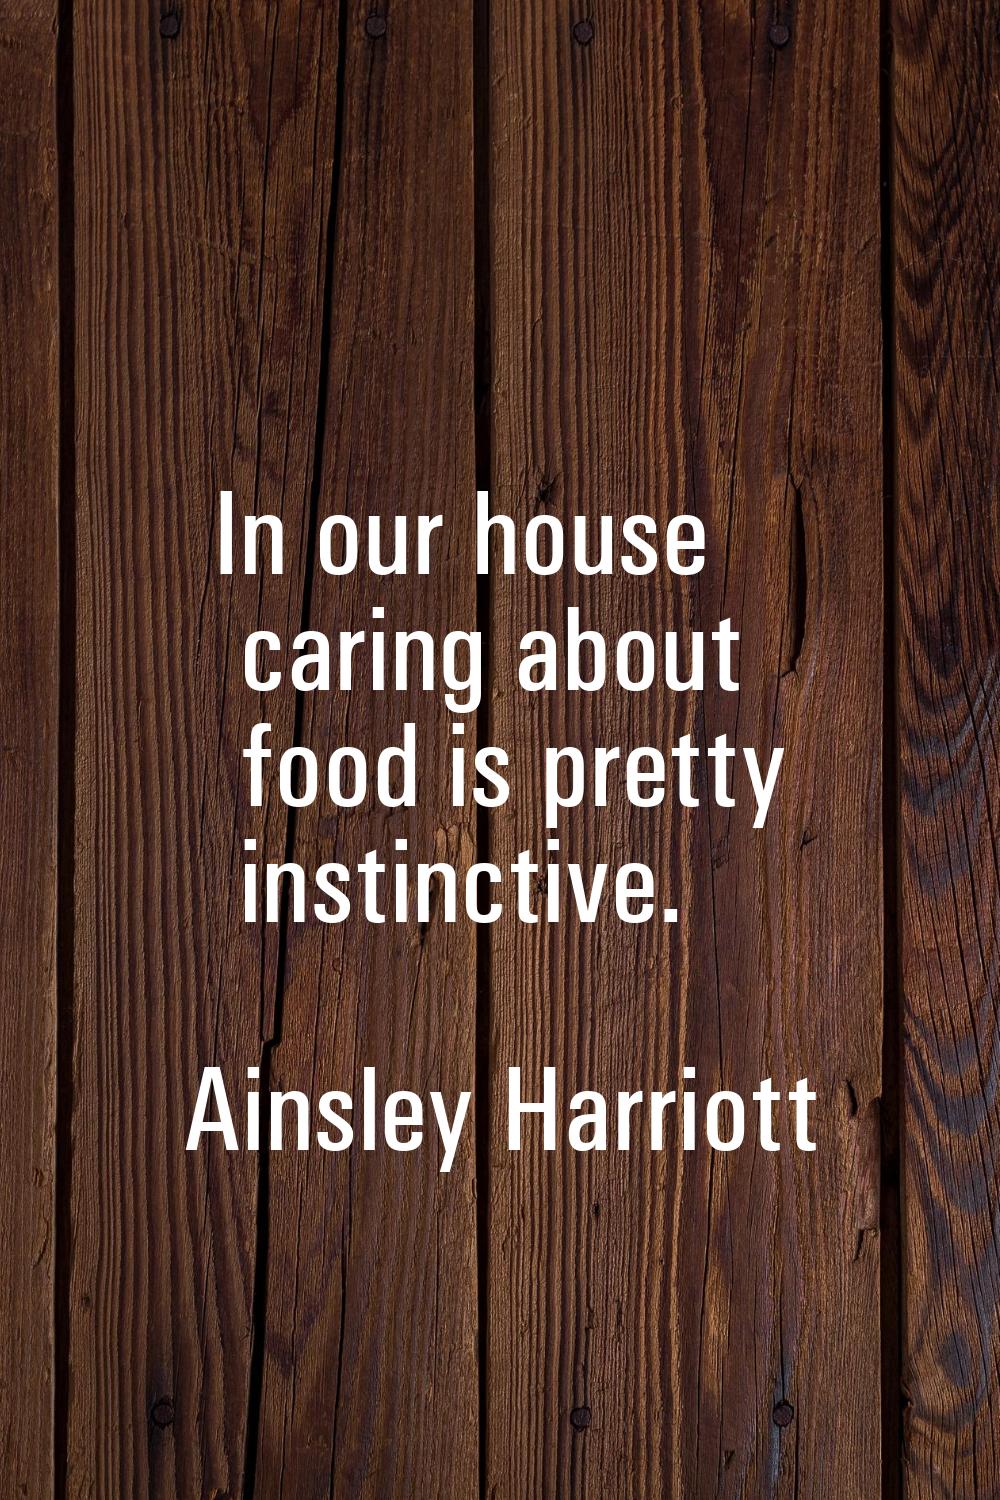 In our house caring about food is pretty instinctive.